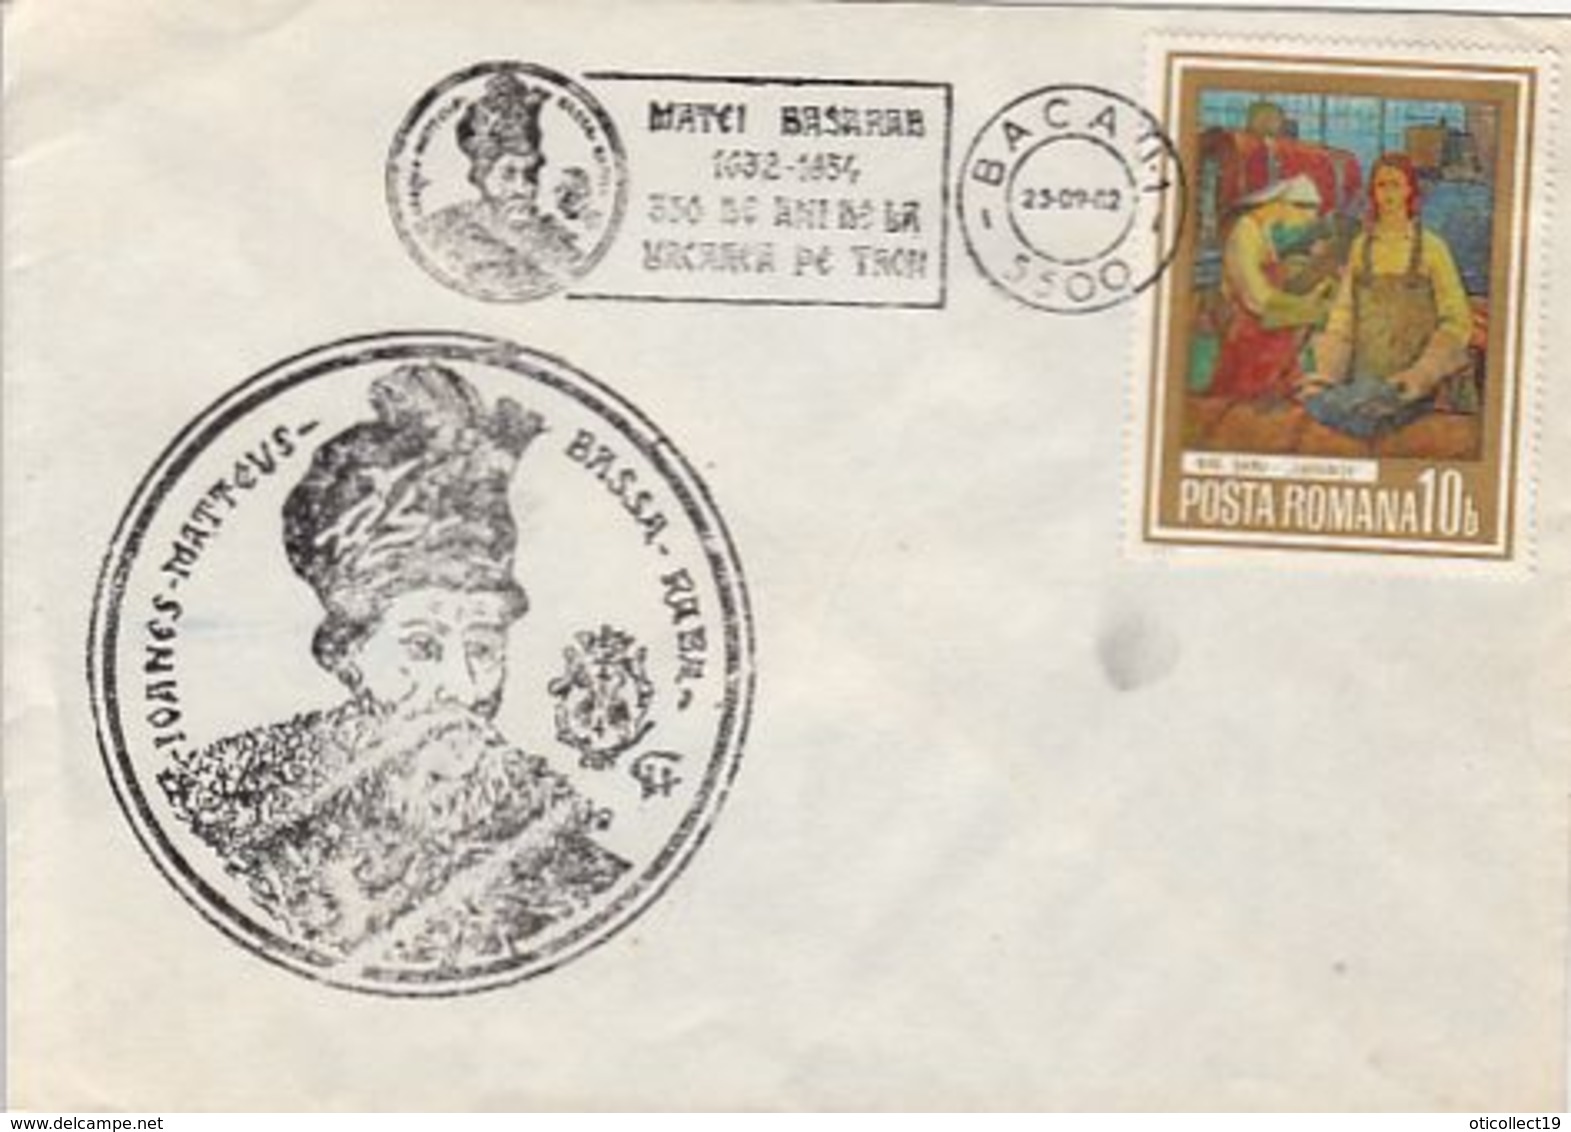 KING MATEI BASARAB OF WALLACHIA, SPECIAL COVER, 1982, ROMANIA - Covers & Documents